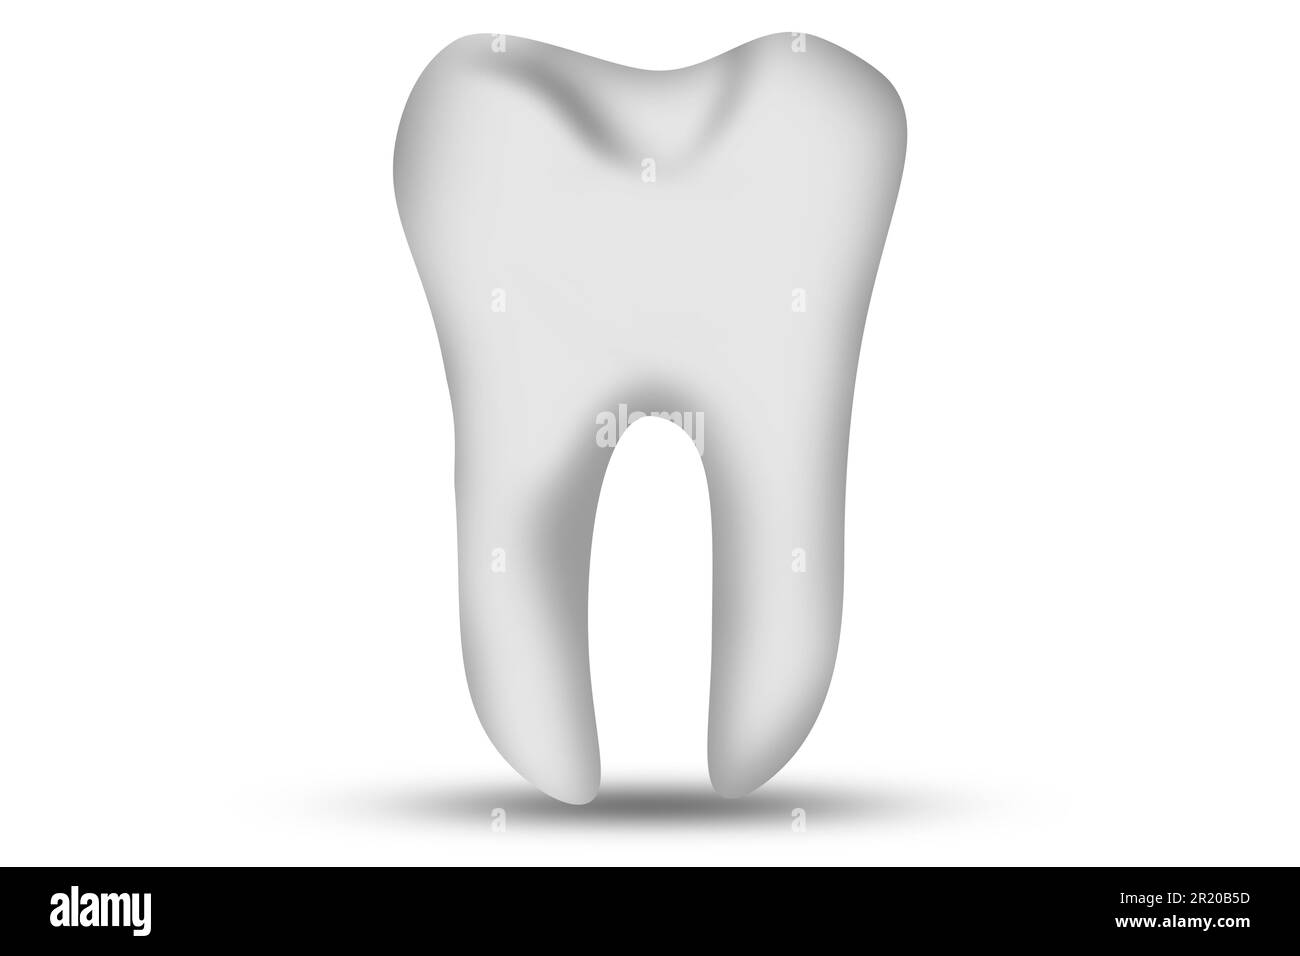 Tooth illustration isolated on white background, 3d rendering Stock Photo